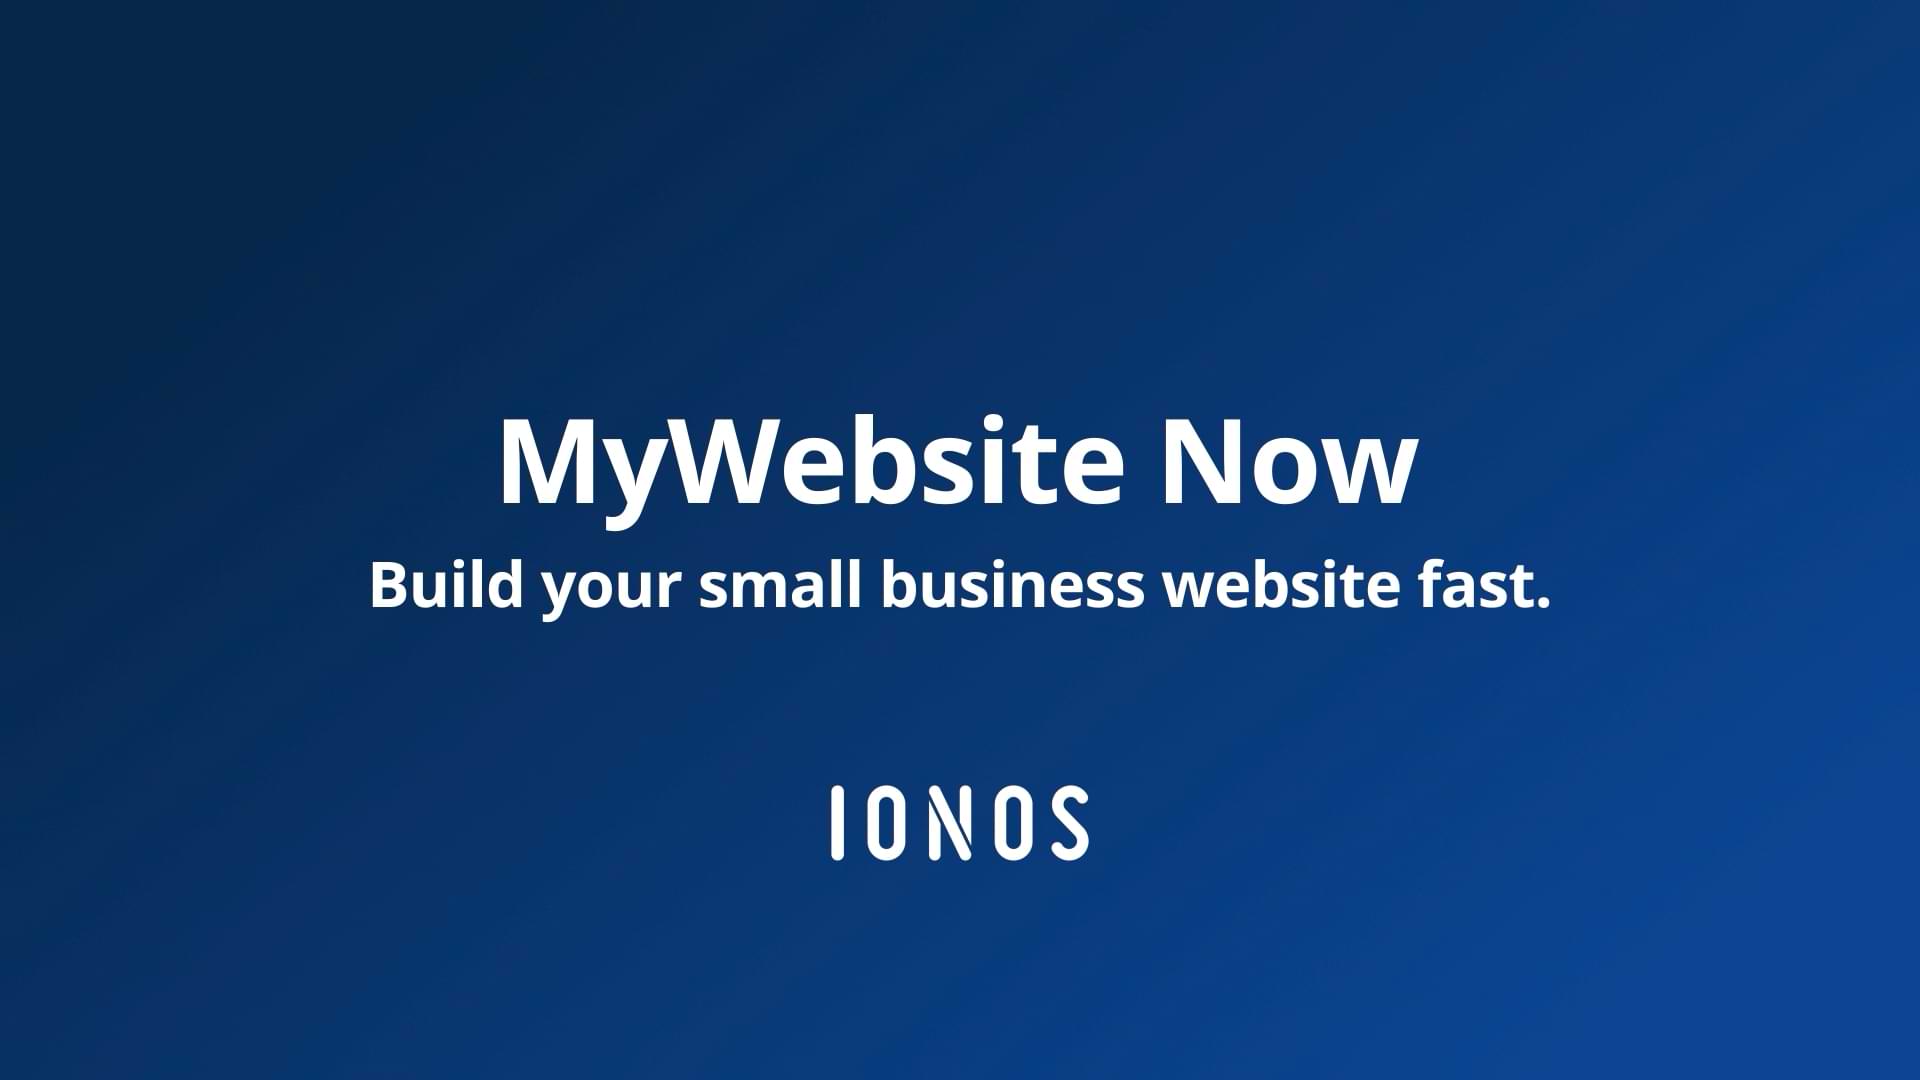 Build your small business website fast with MyWebsite Now